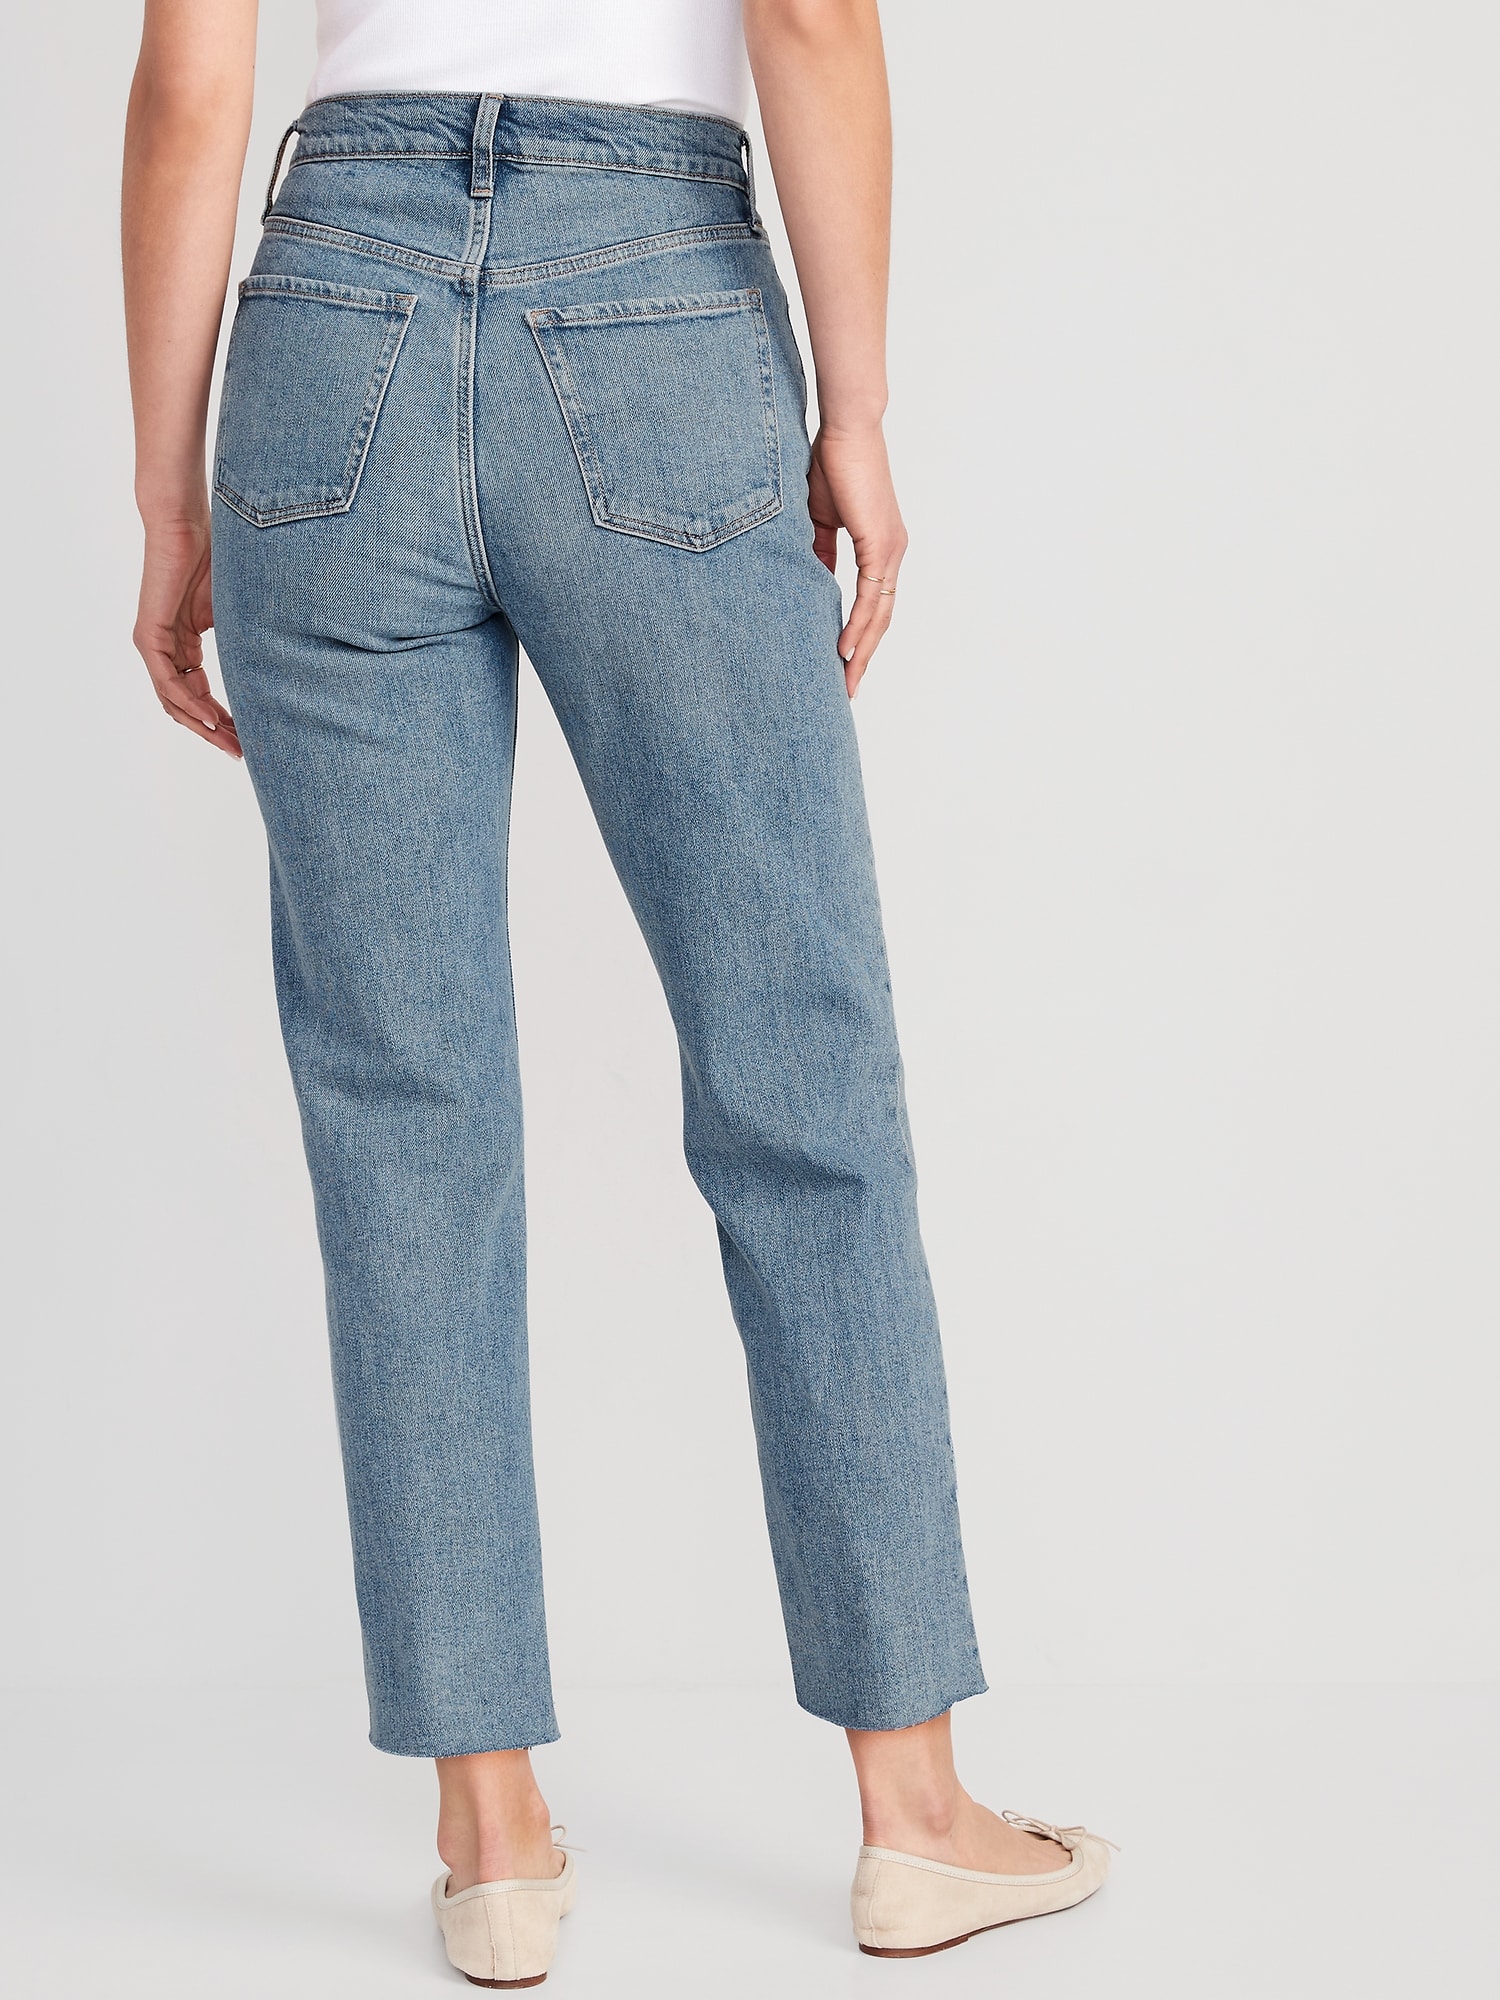 Extra High-Waisted Button-Fly Ripped Cut-Off Straight Ankle Jeans for ...